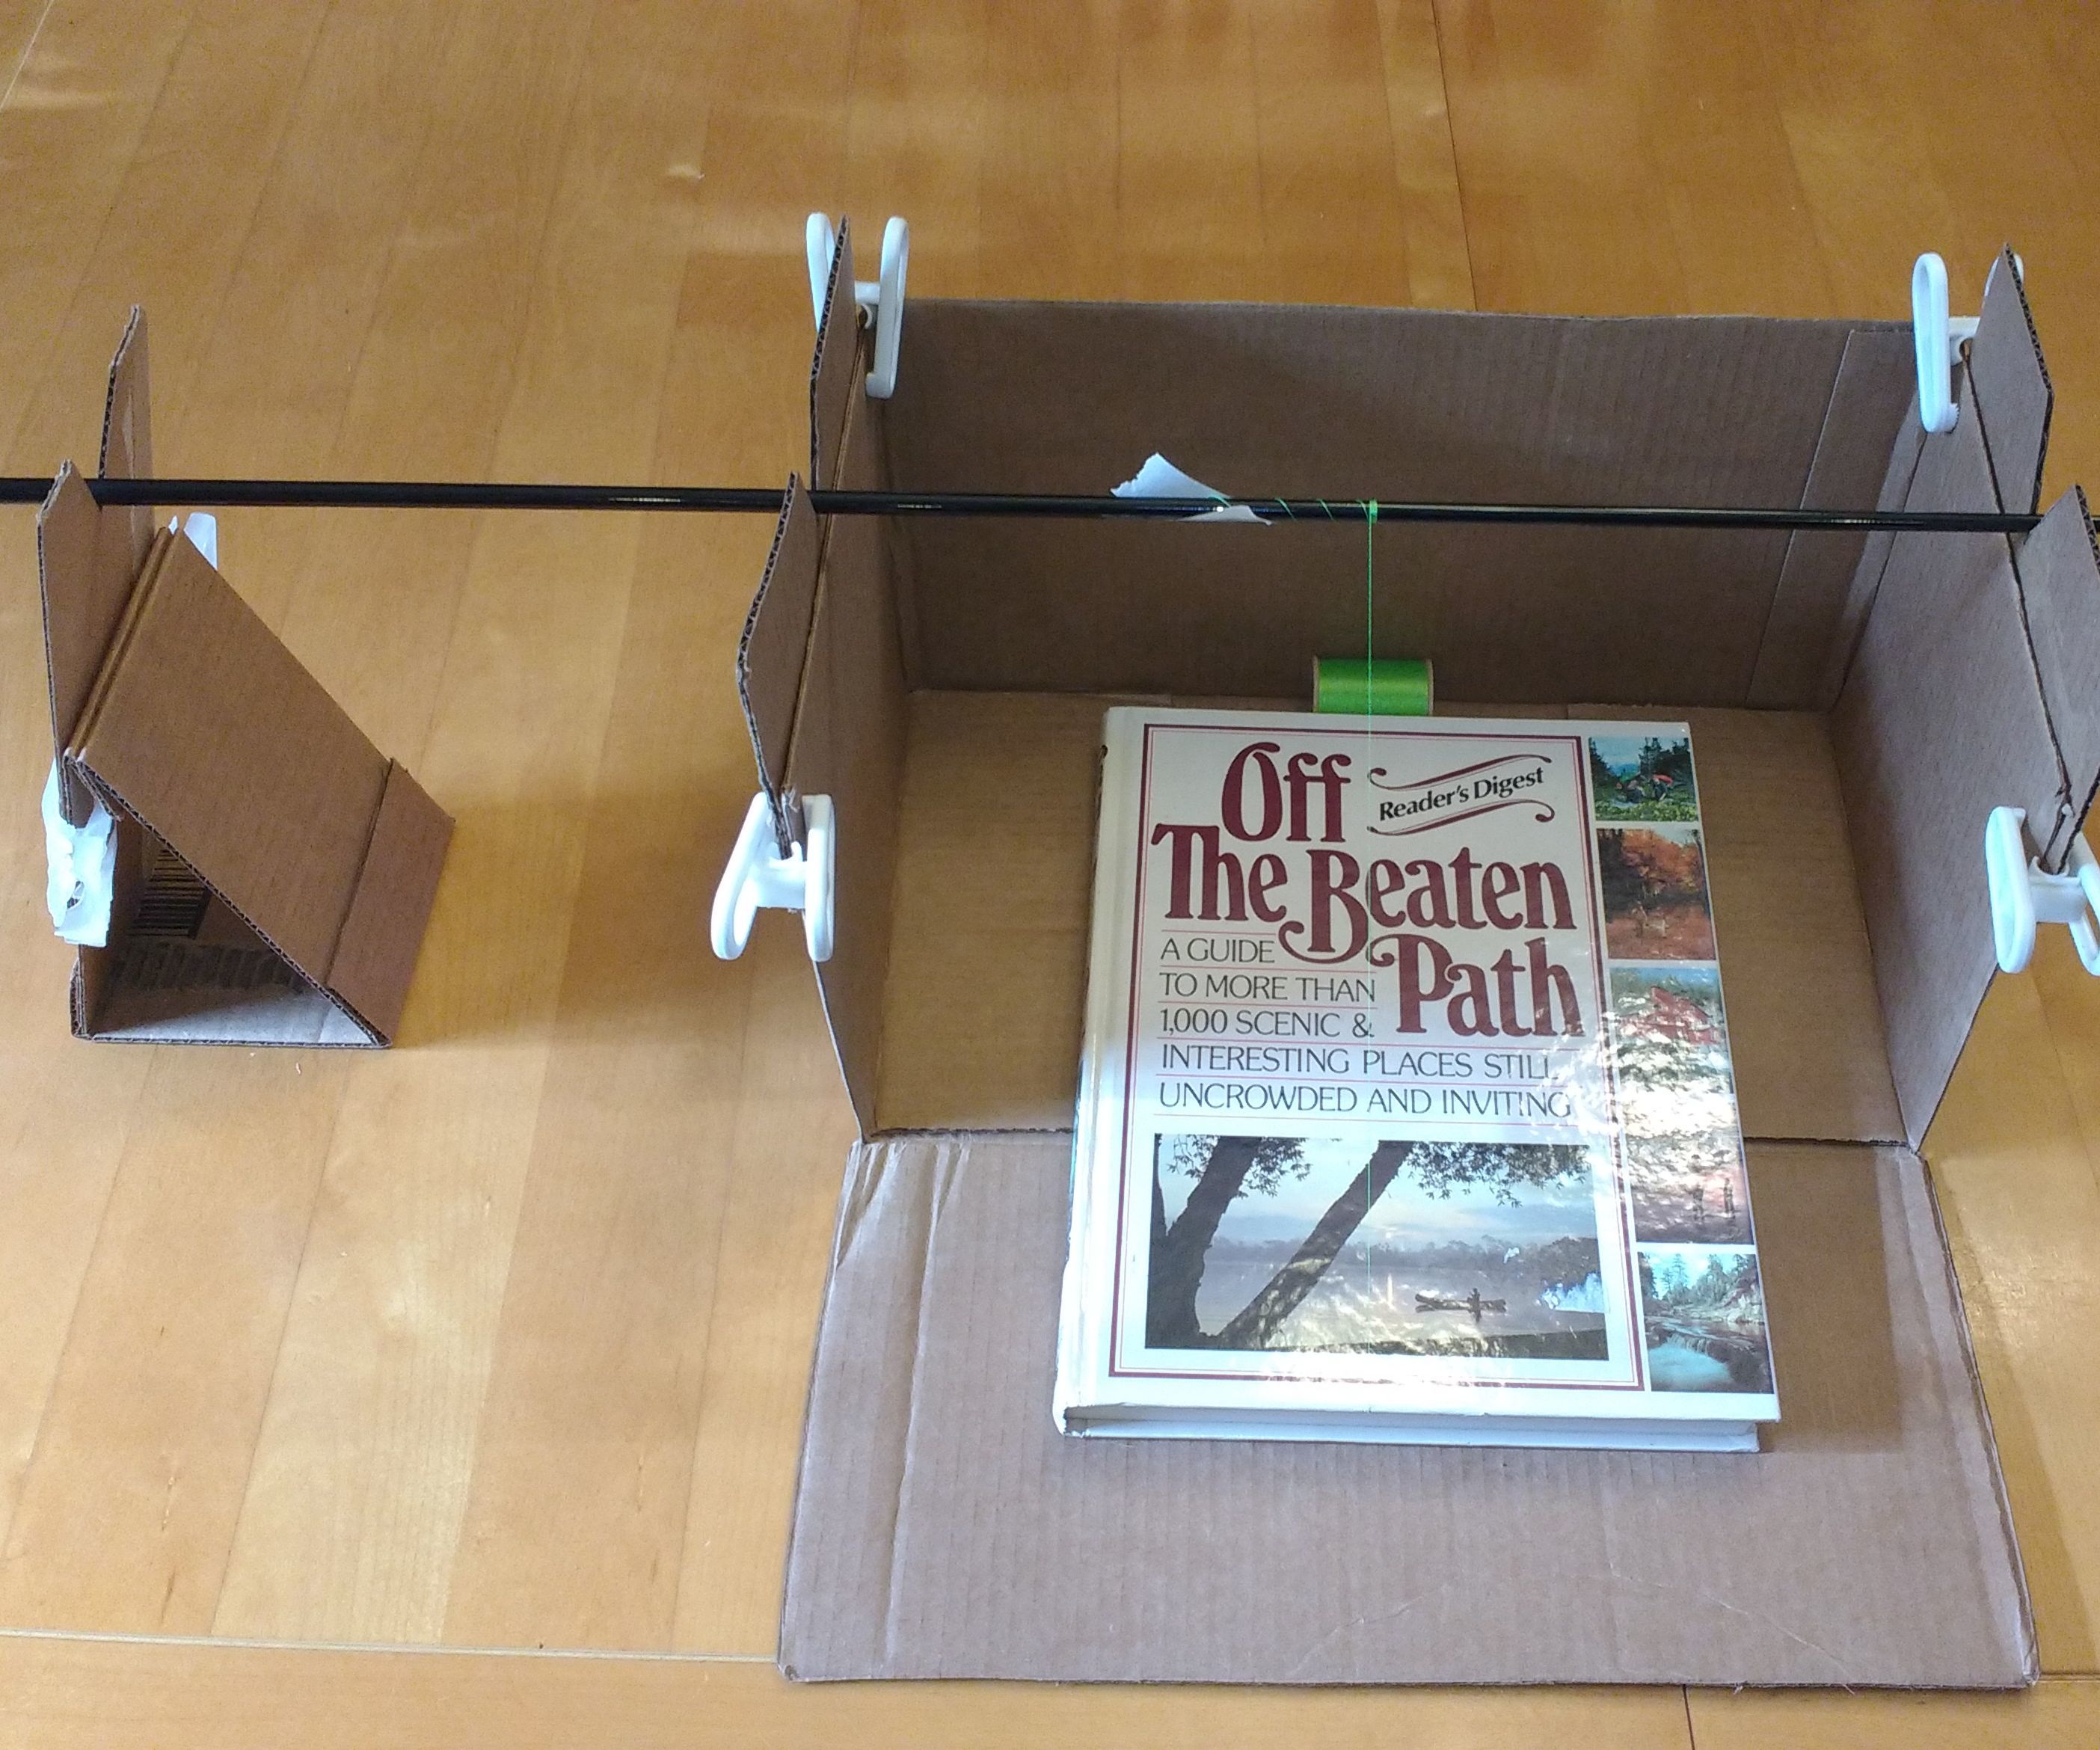 Make a Free/Inexpensive Fishing Rod Wrapping Jig Out of a Cardboard Box